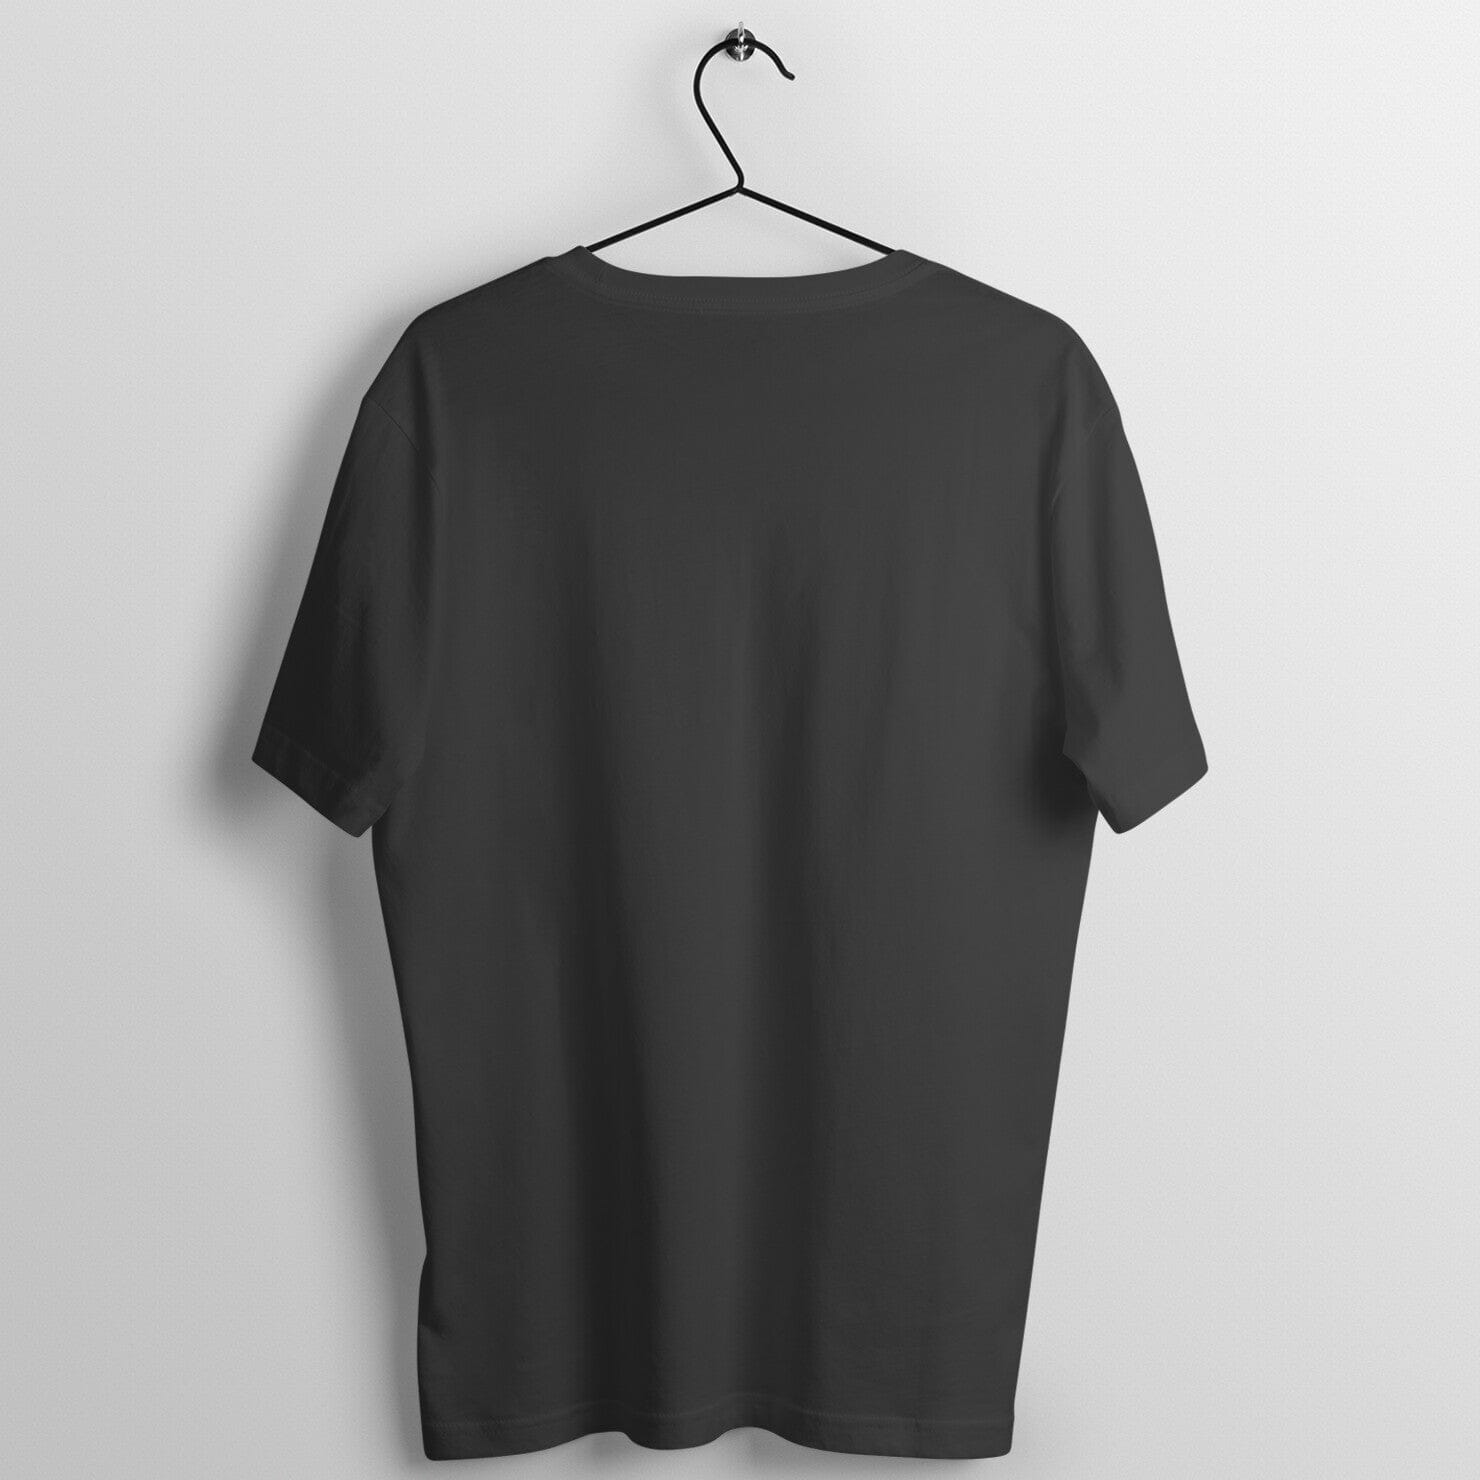 More Green Energy Exclusive Black T-shirt for Men and Women Printrove 